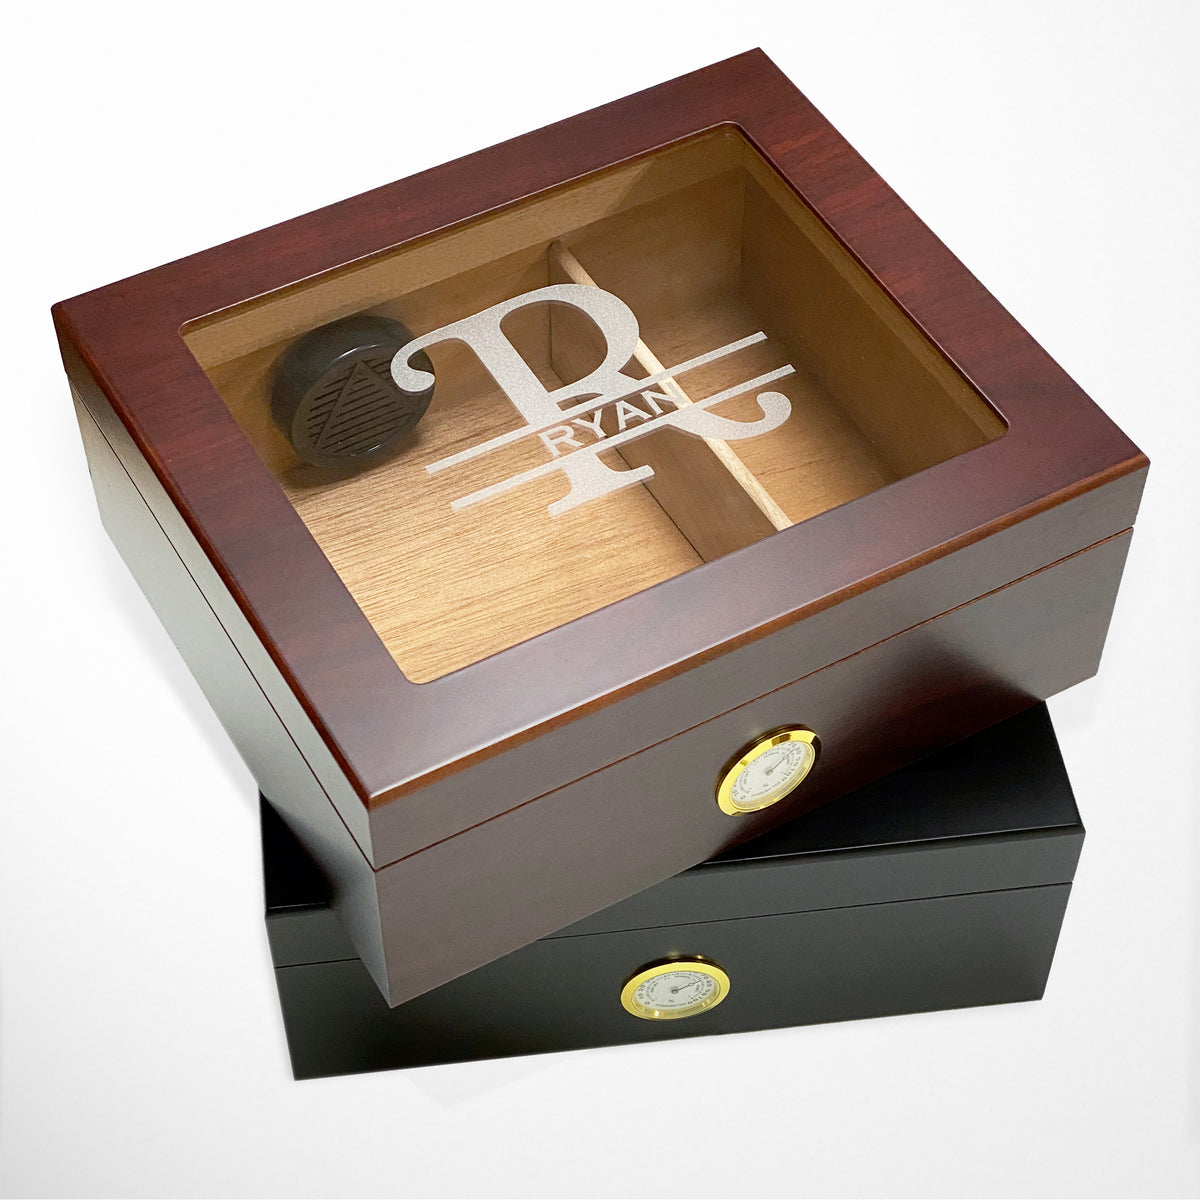 Engraved cigar humidor glasstop, Personalized cigar box, Cherry or Black finish / Laser engraved